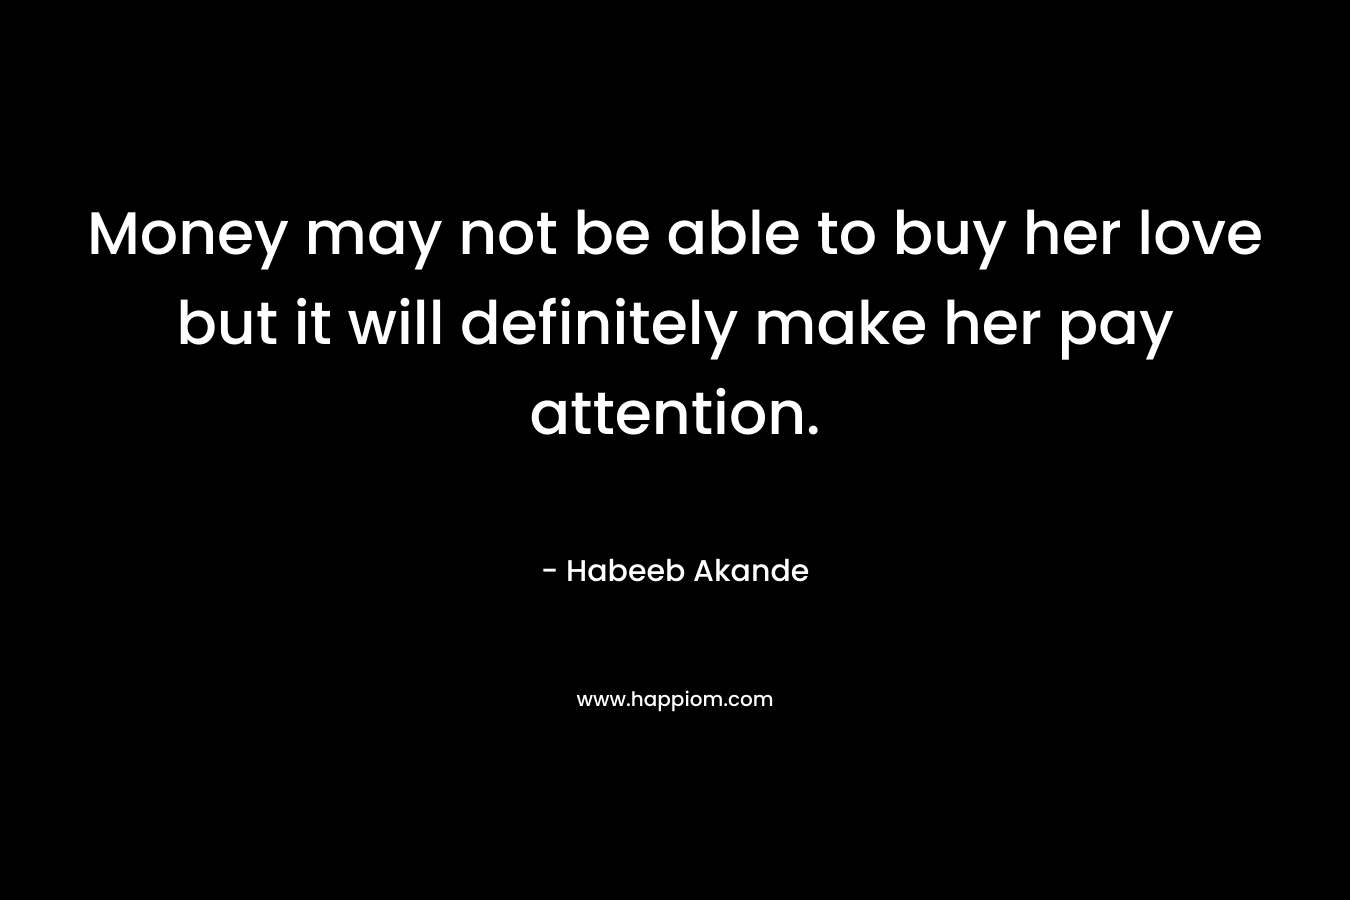 Money may not be able to buy her love but it will definitely make her pay attention.